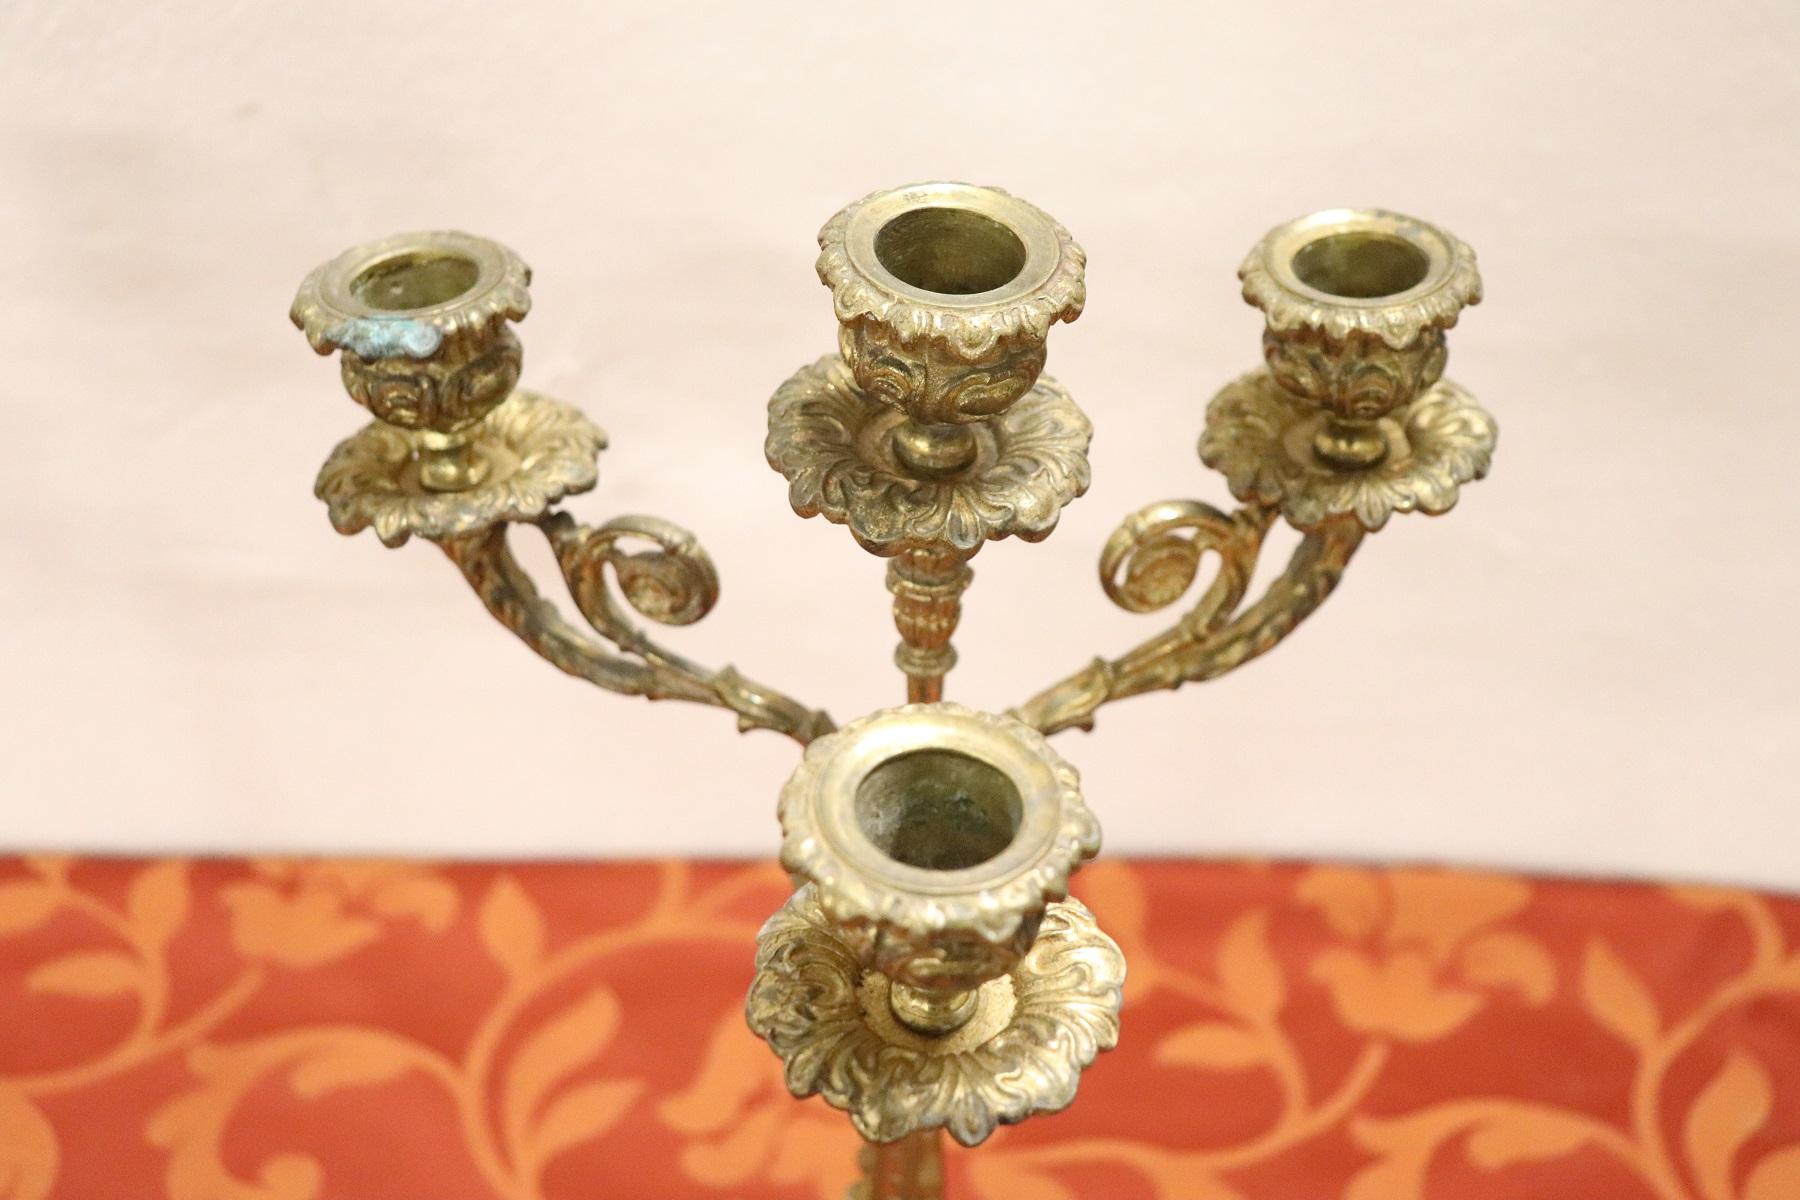 Late 19th Century 19th Century French Napoleon III Pair of Candelabras in Gilded Bronze 4 Arms